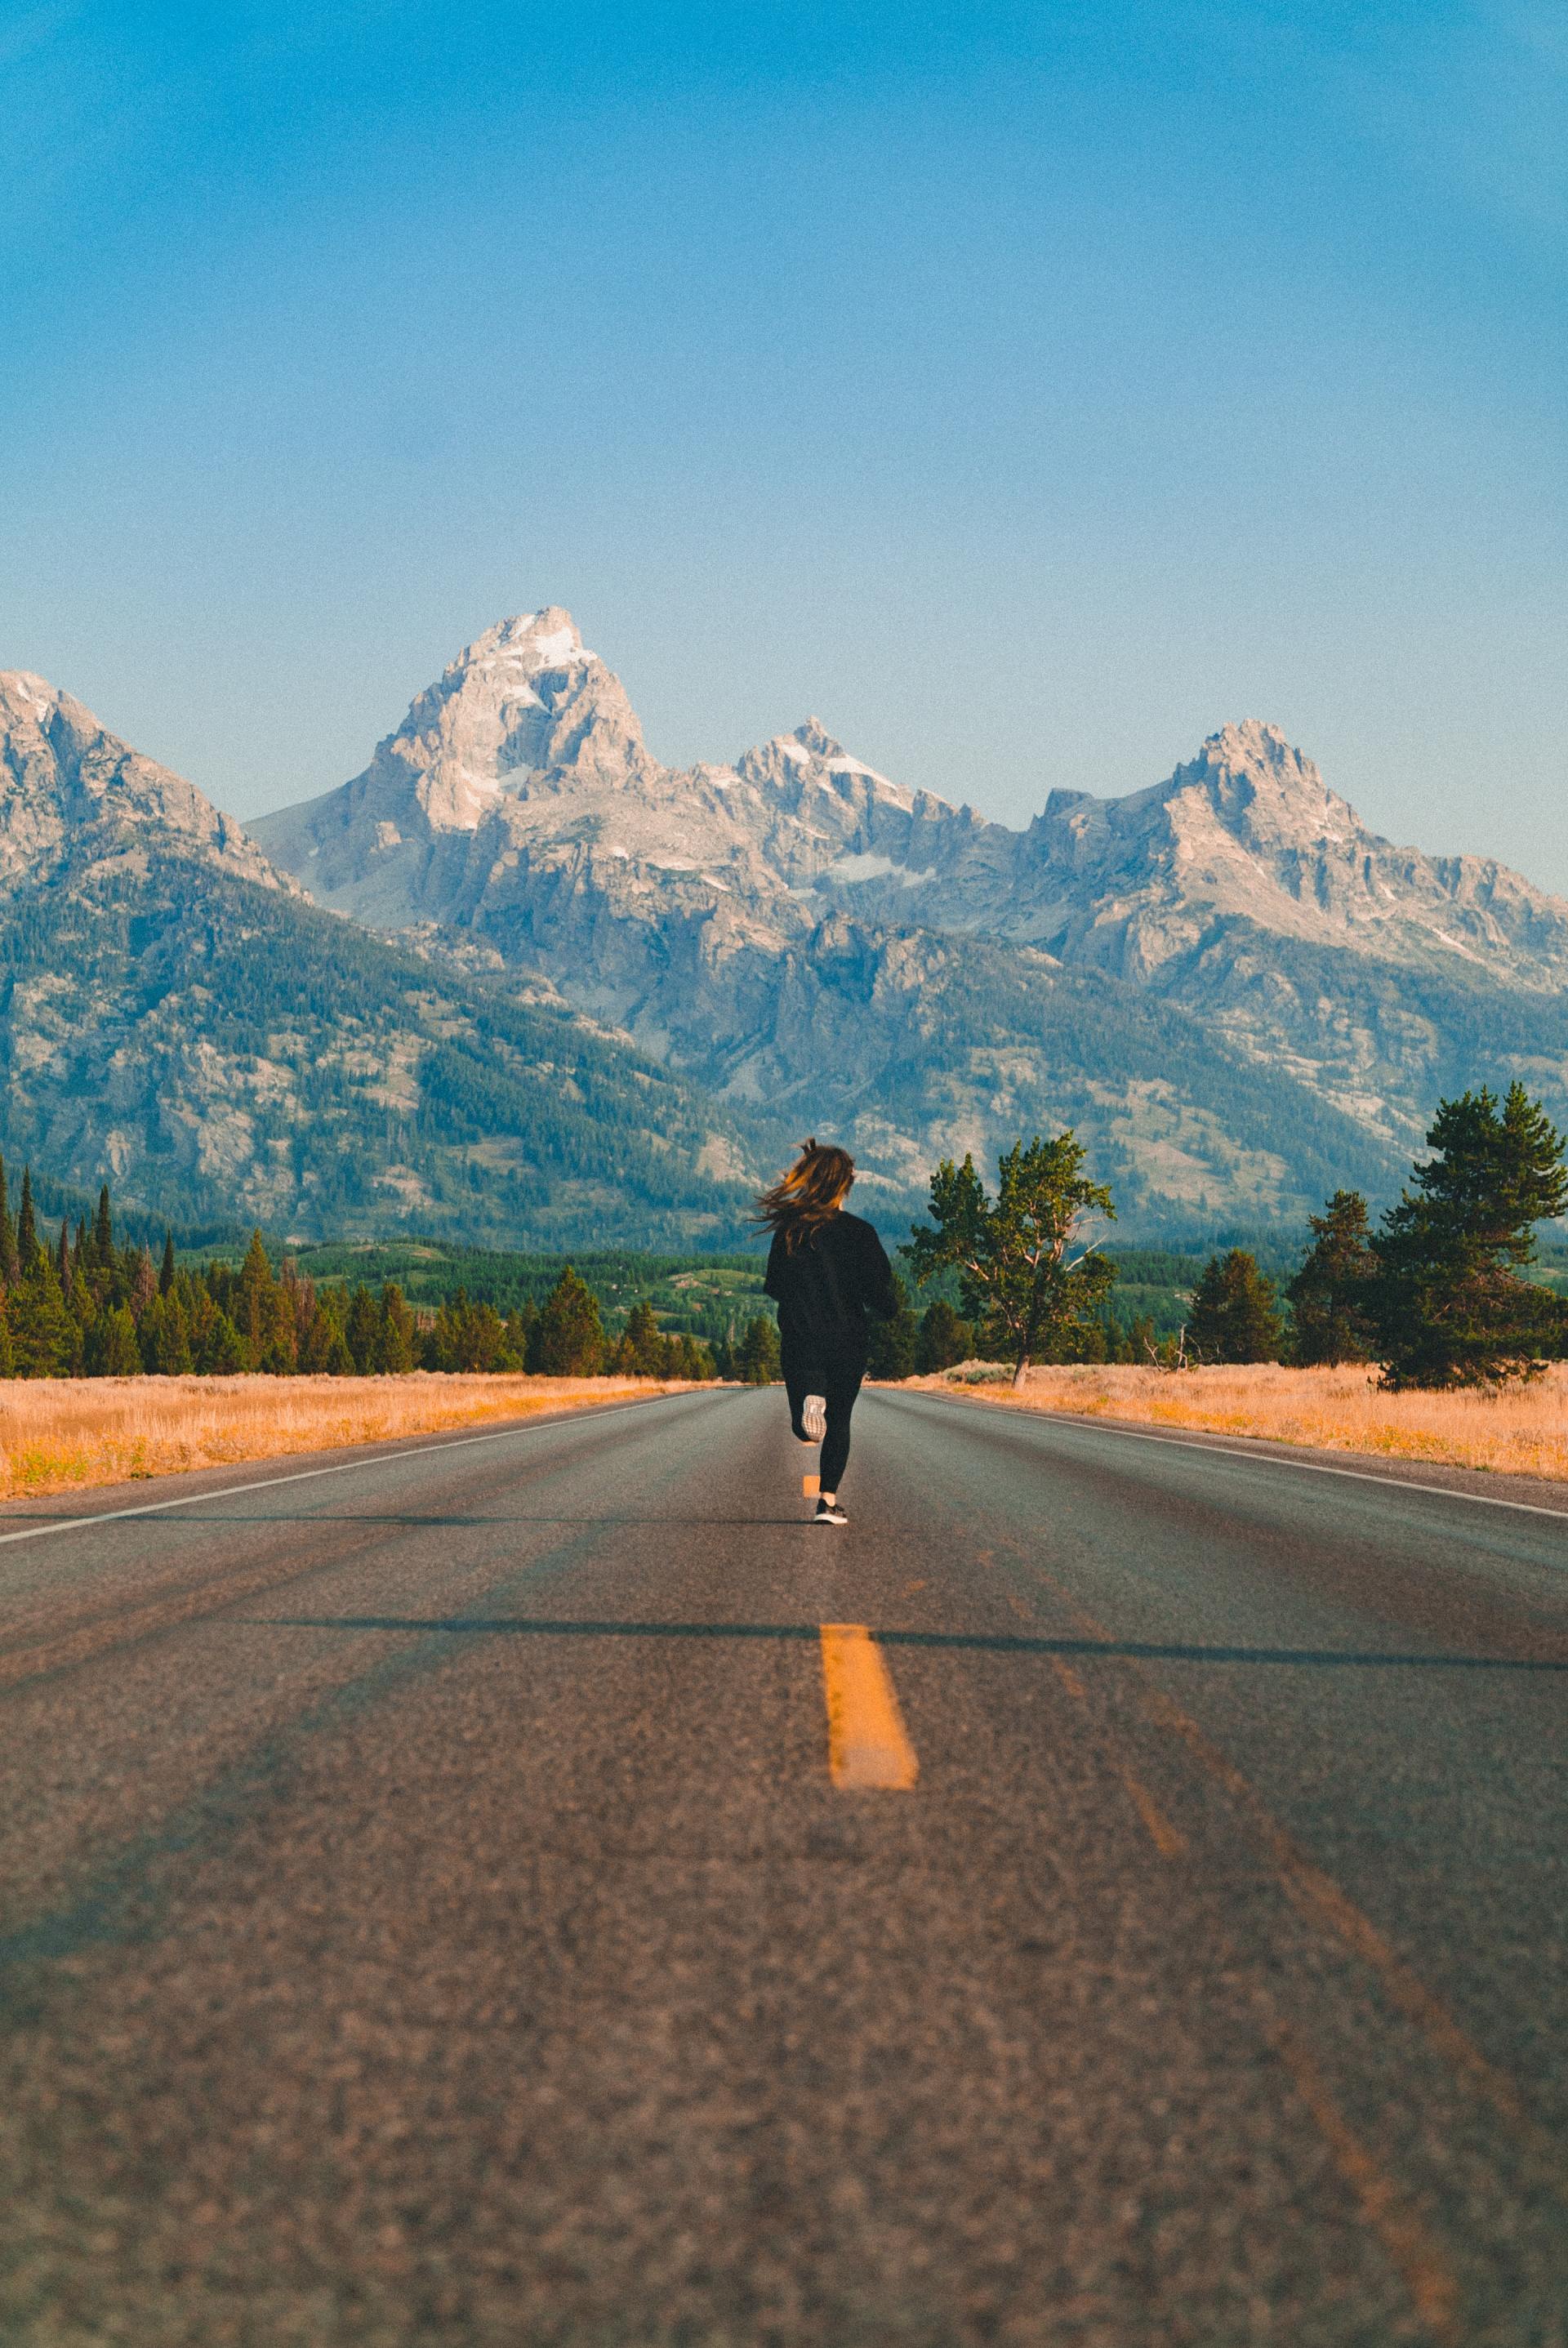 A person is walking down a road with mountains in the background.